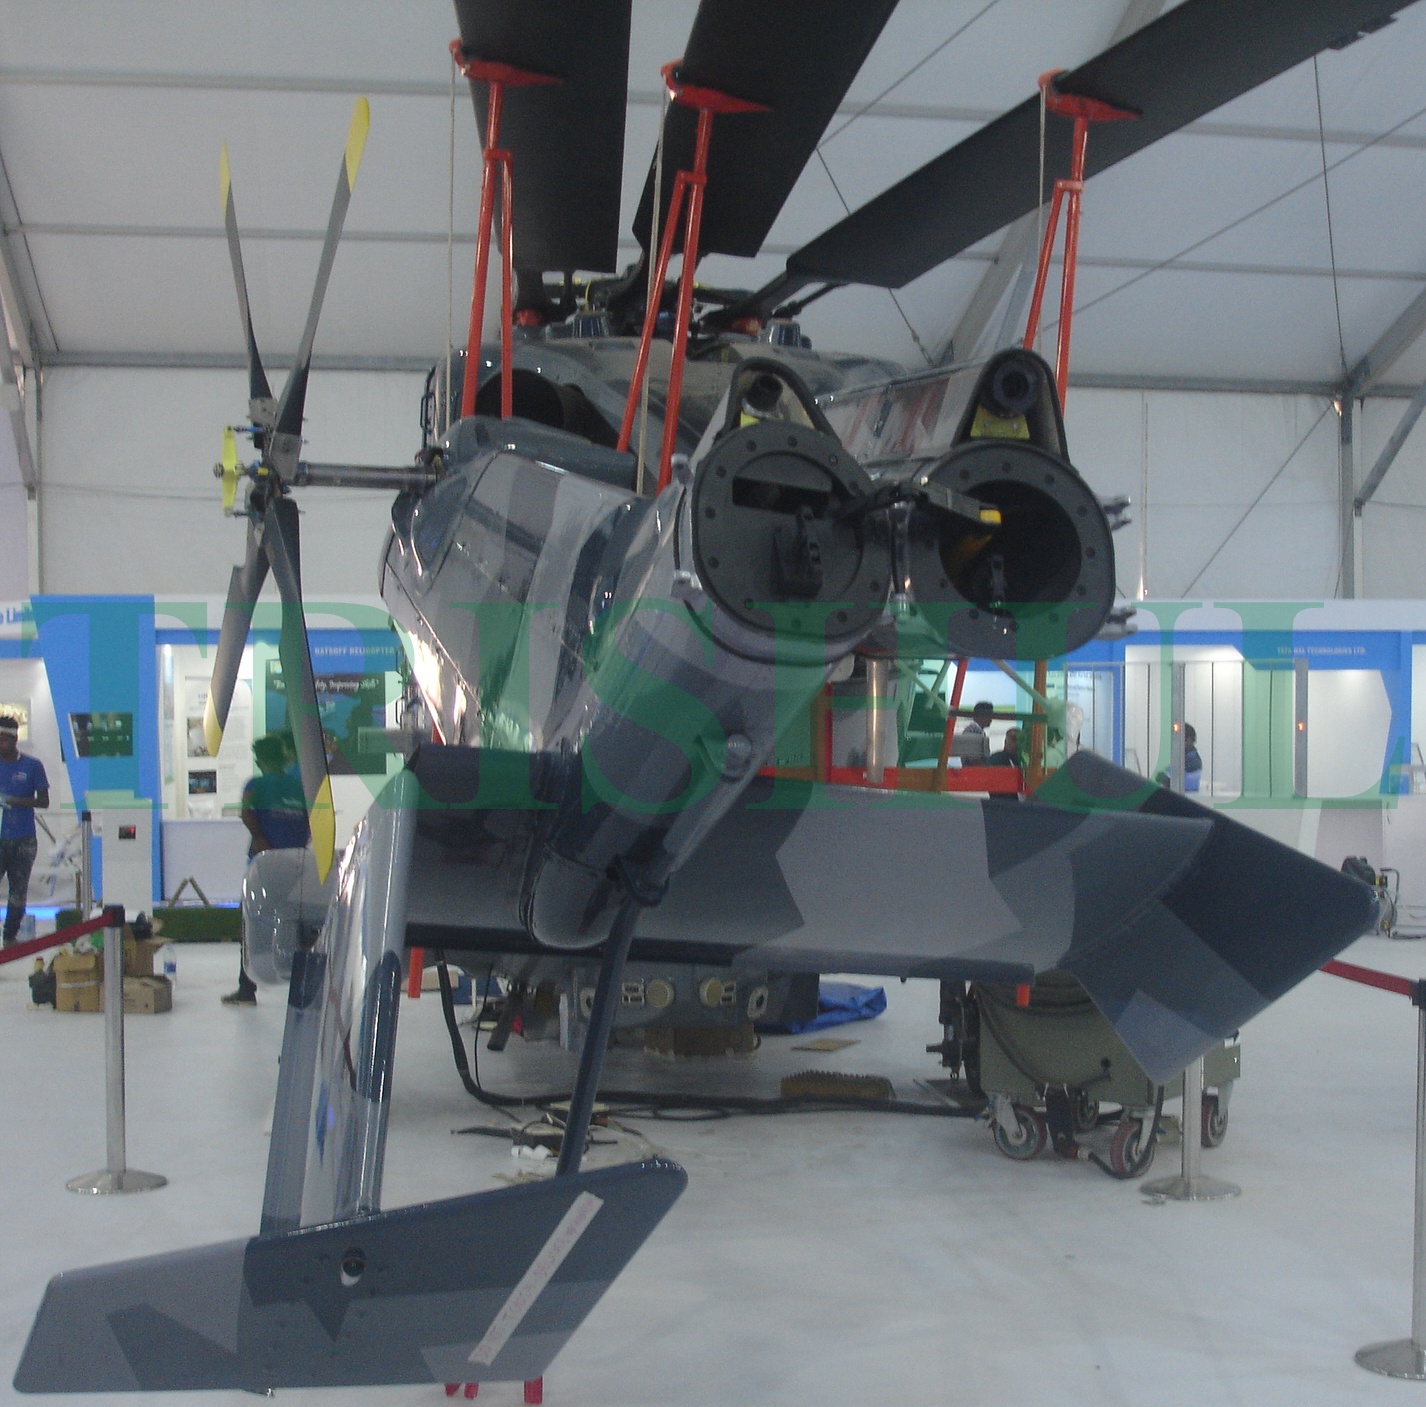 Dhruv%2BALH%2BMk.4%2Bwith%2BFolding%2BTail-Rotor%2BSection.jpg